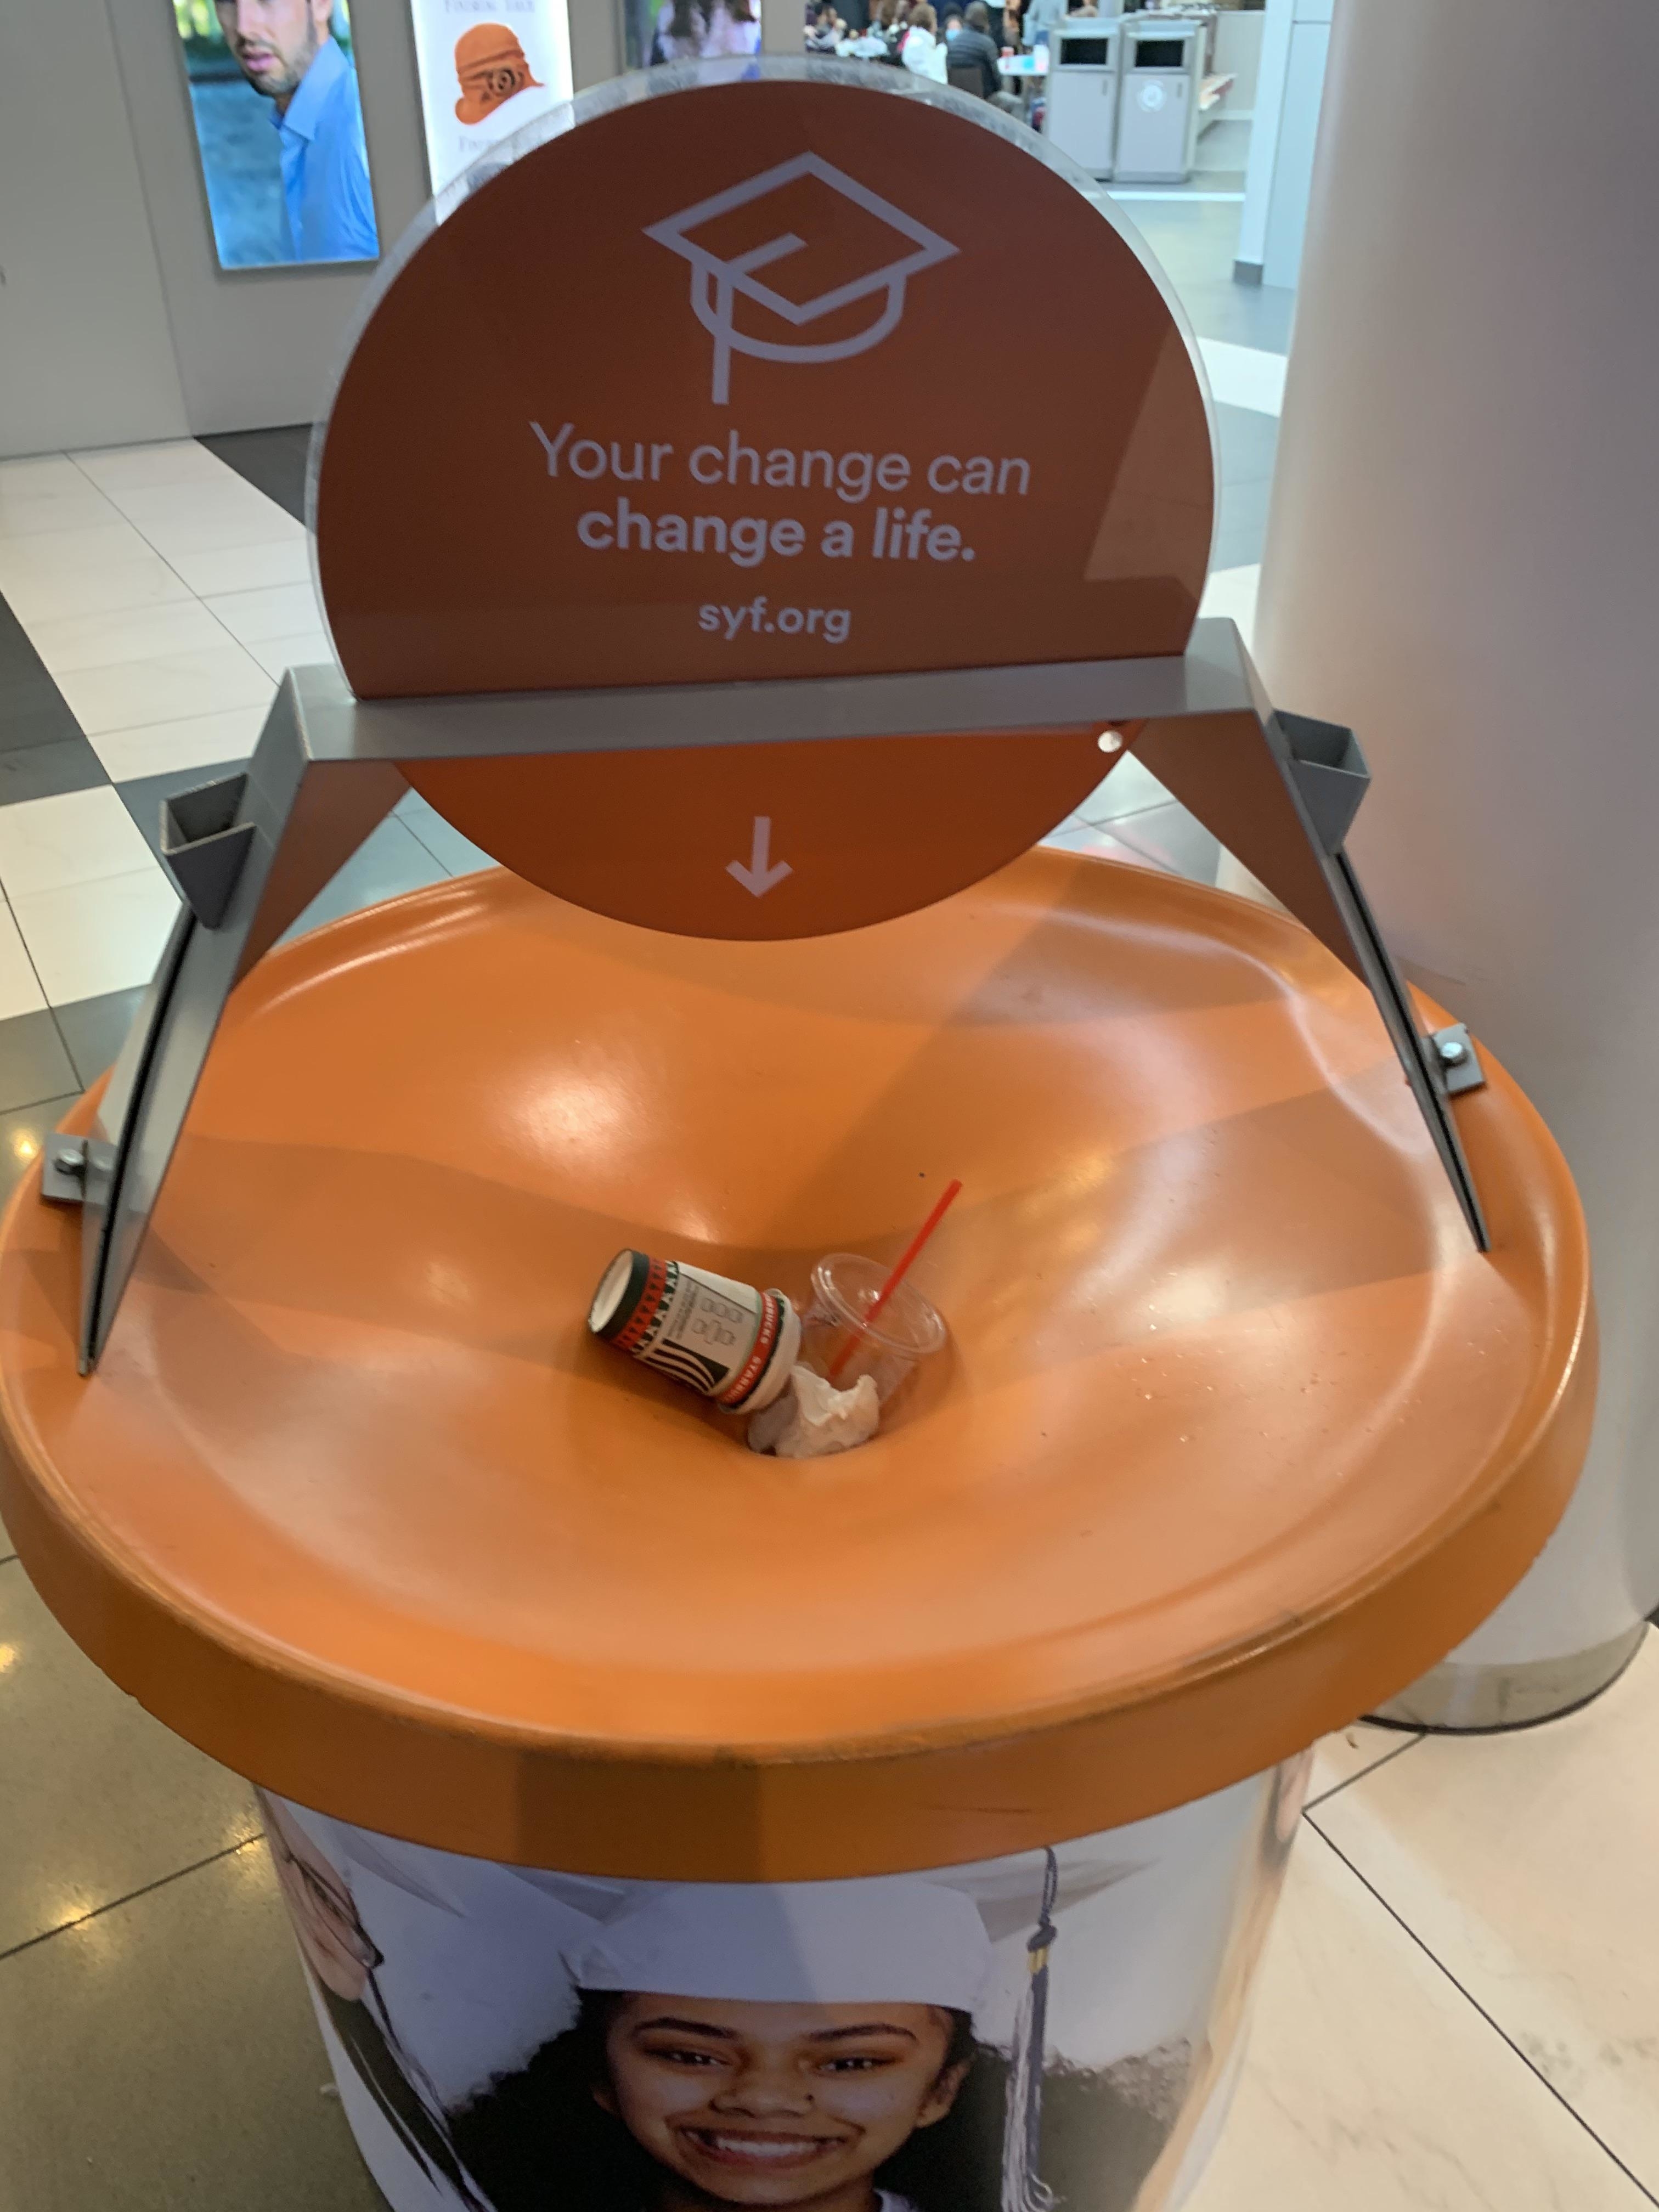 Donation station with a sign &quot;Your change can change a life&quot; with trash like a can, plastic cup, and straw on the collection surface